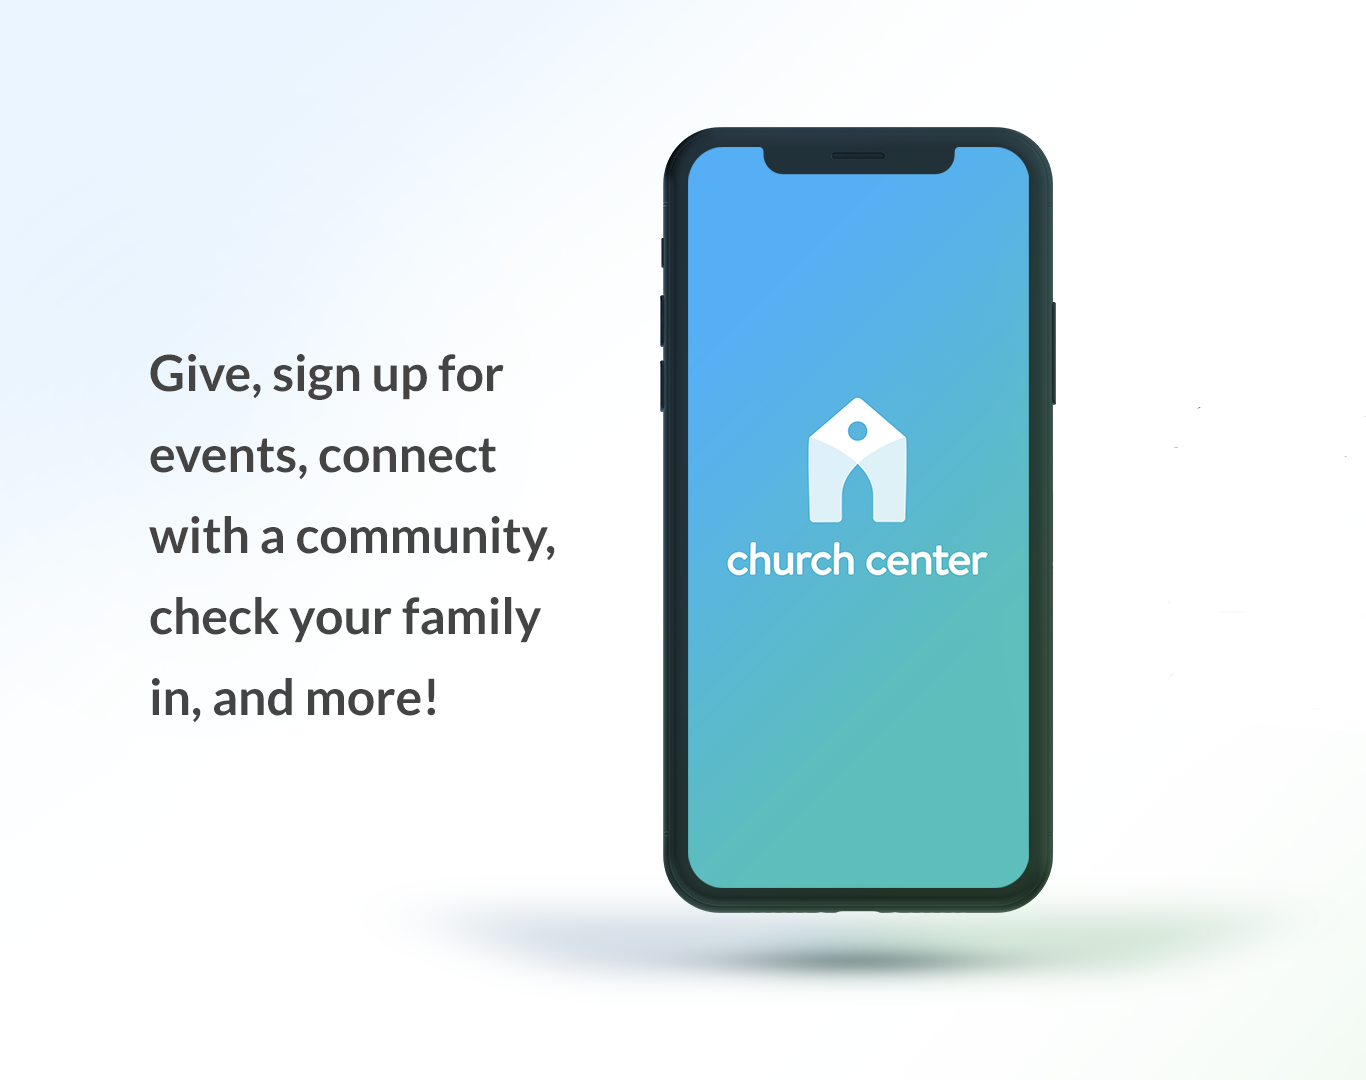 download the church center app